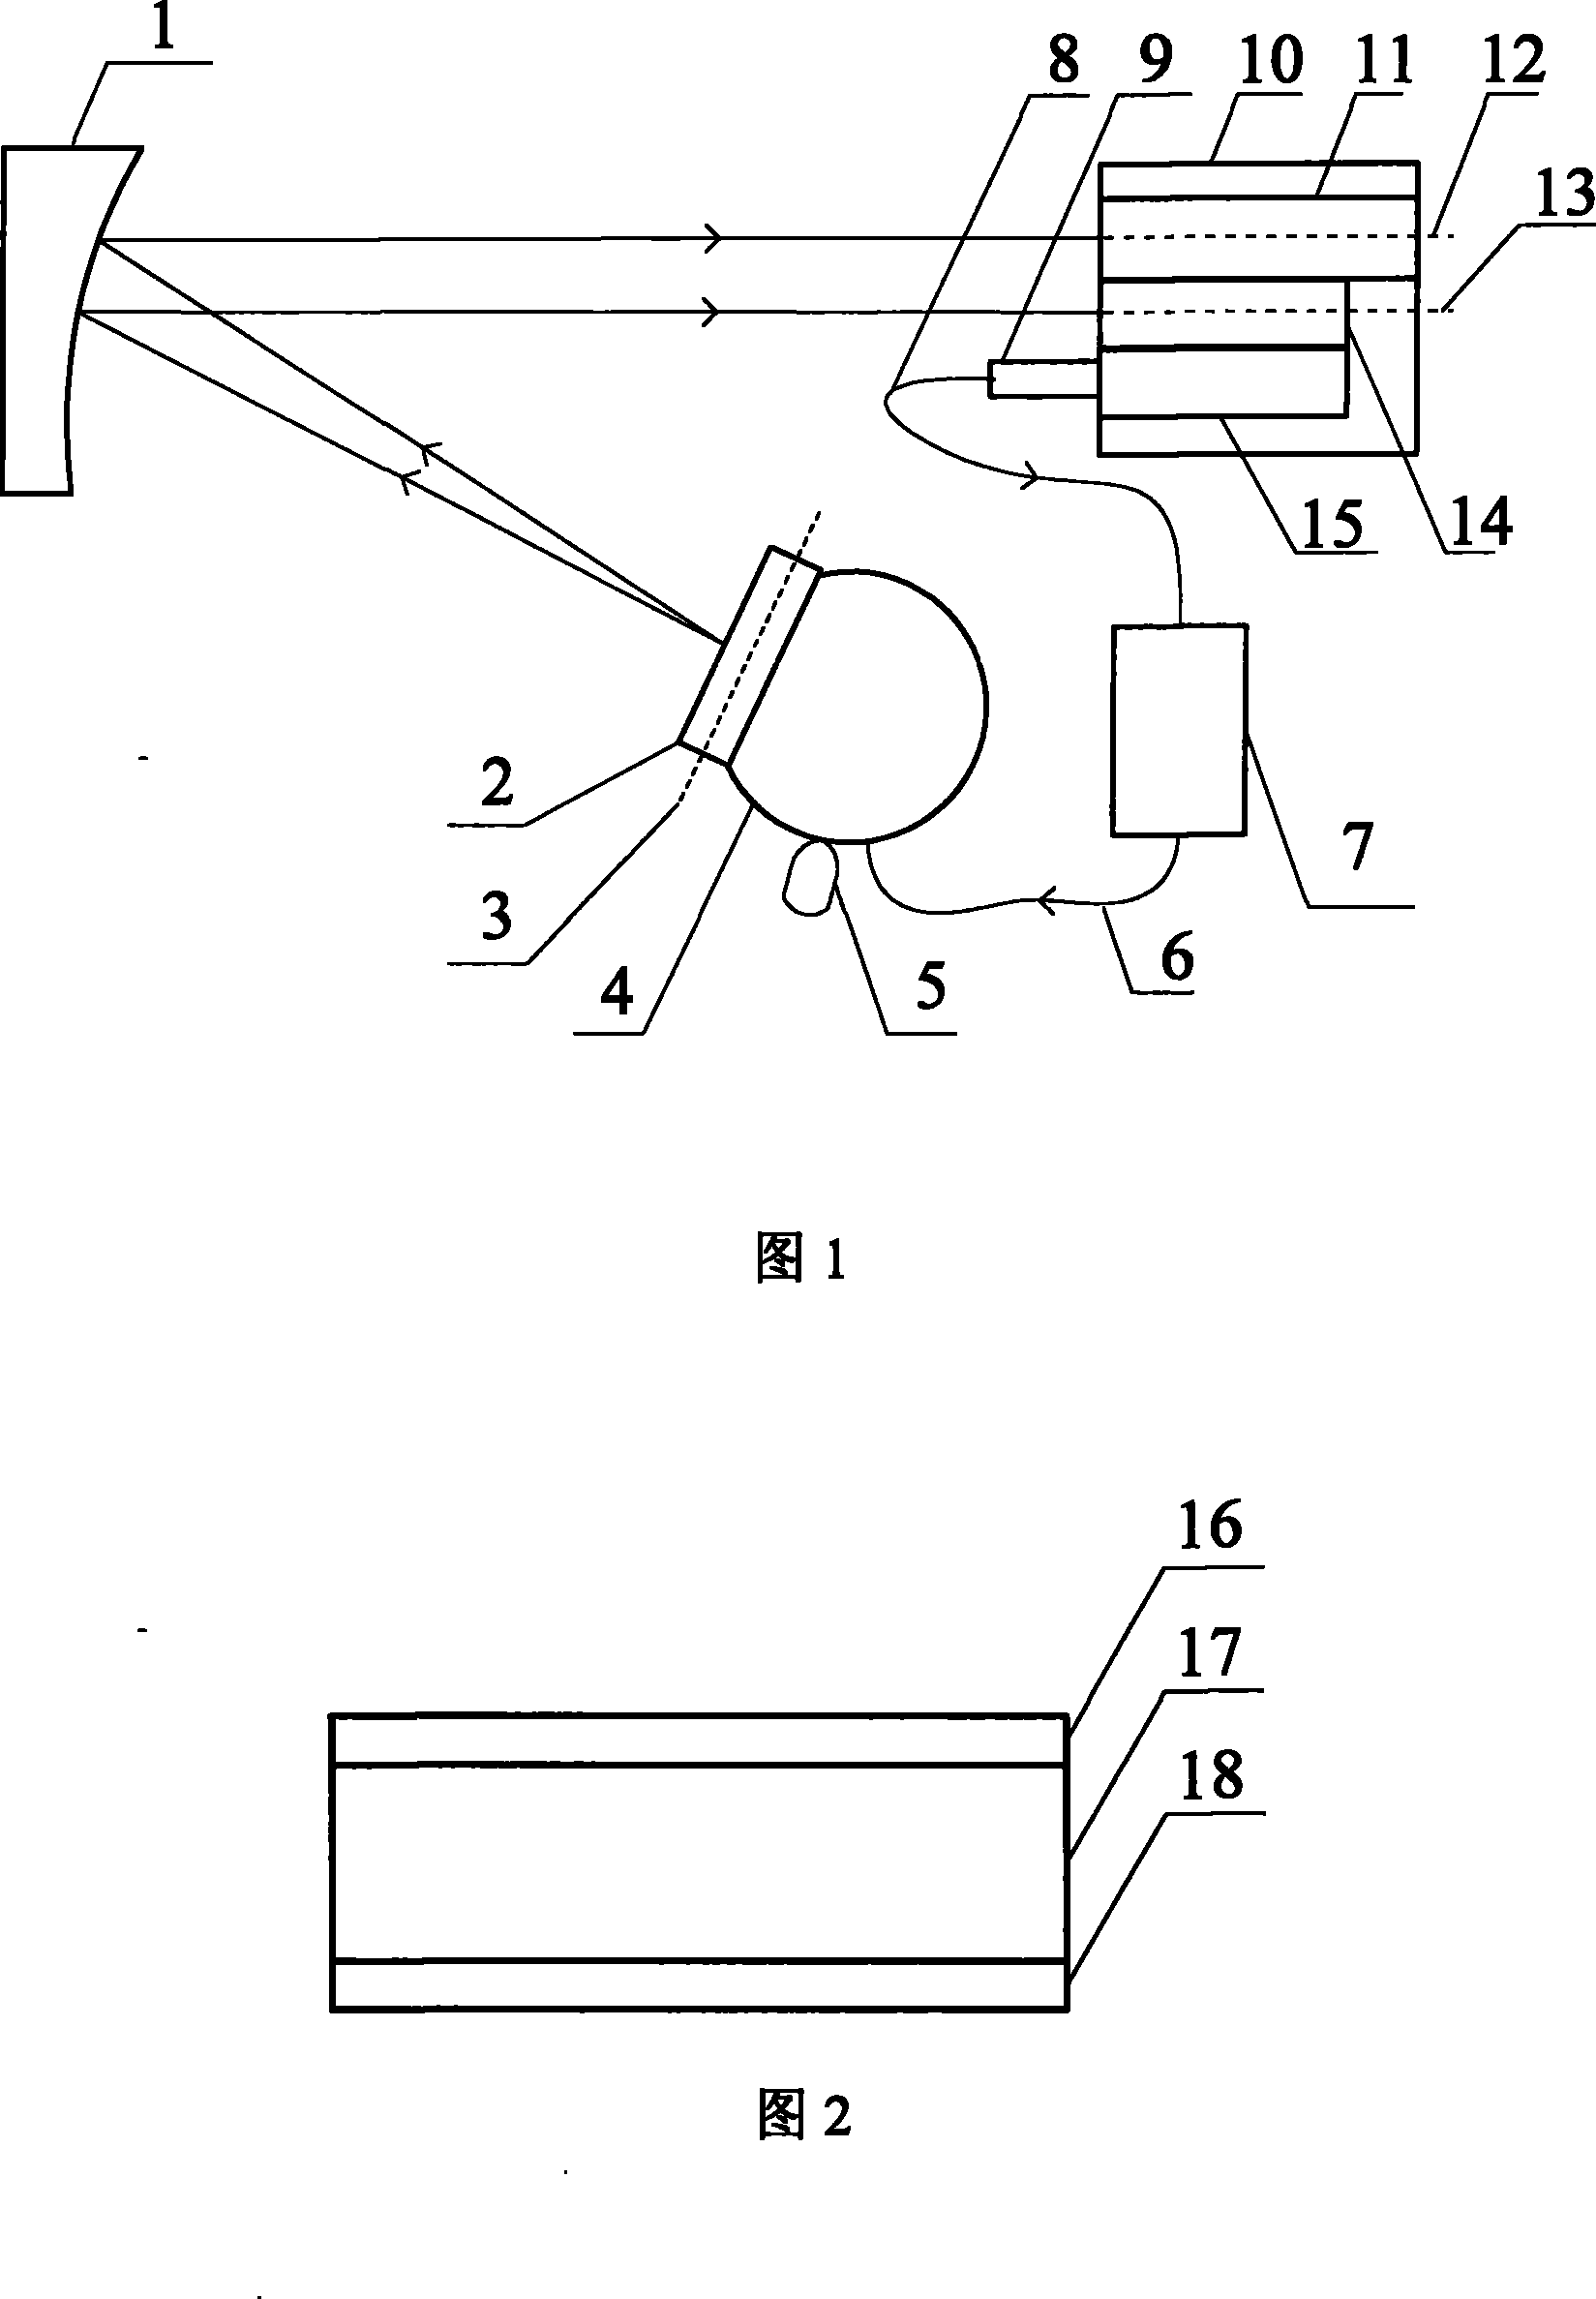 Apparatus for measuring parallelism of laser rangefinder sighting and receiving axes based on liquid crystal modulation